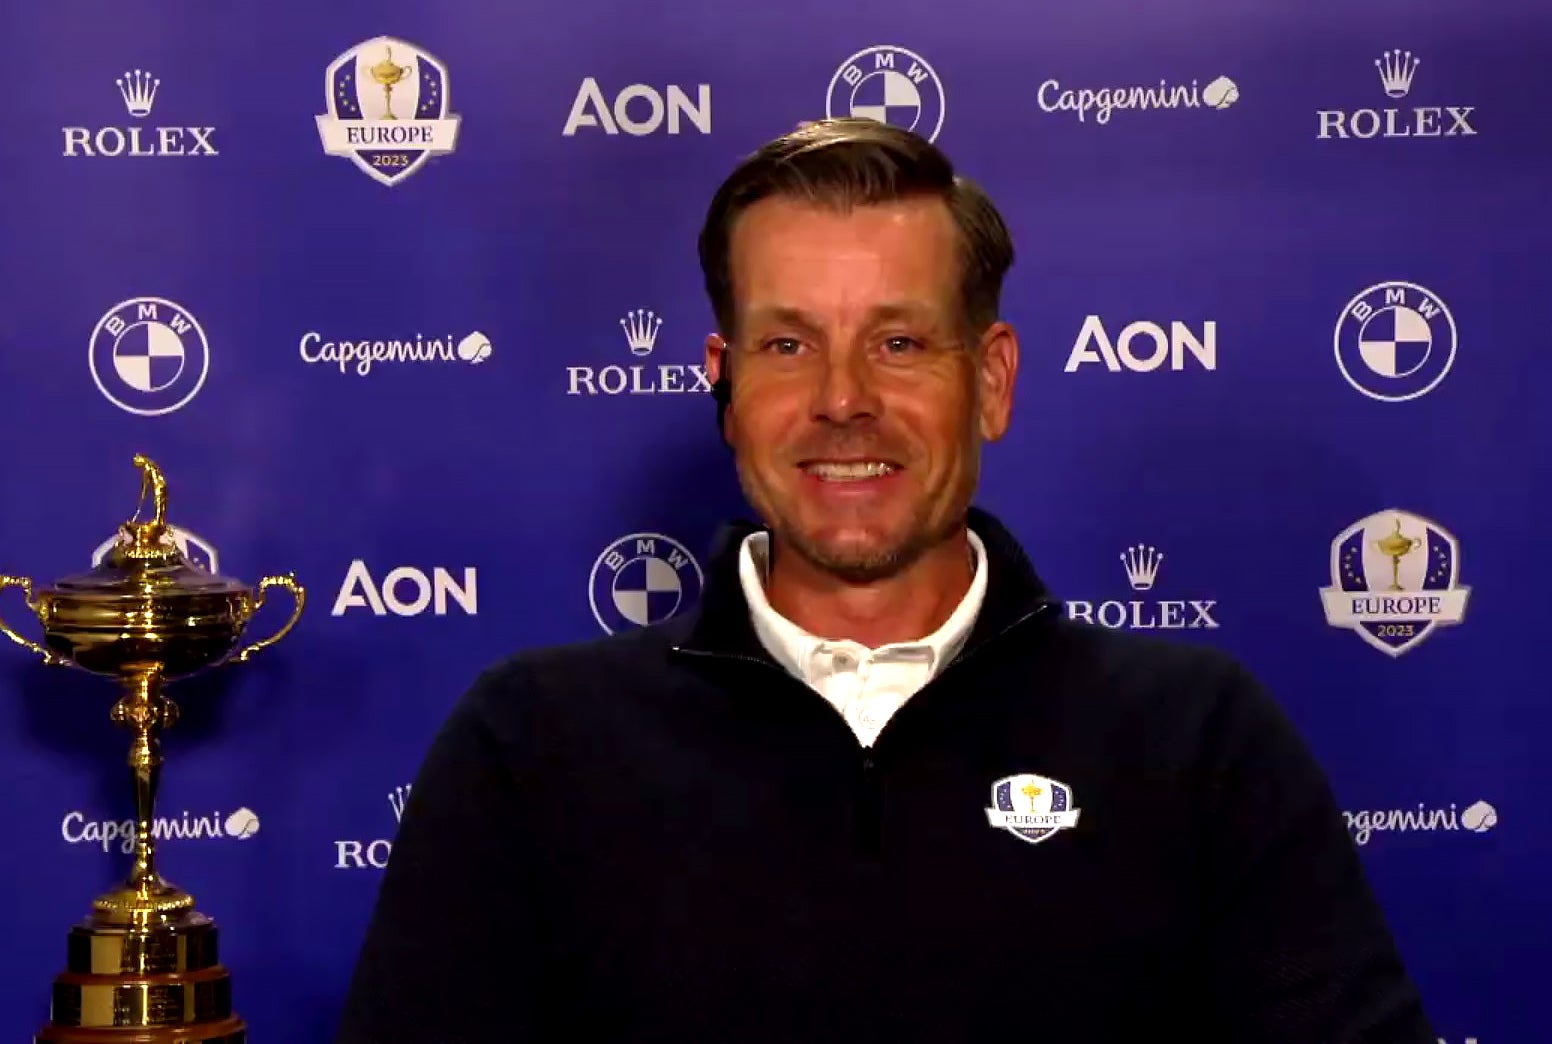 Henrik Stenson’s appointment as Ryder Cup captain reaffirms his commitment to the European Tour